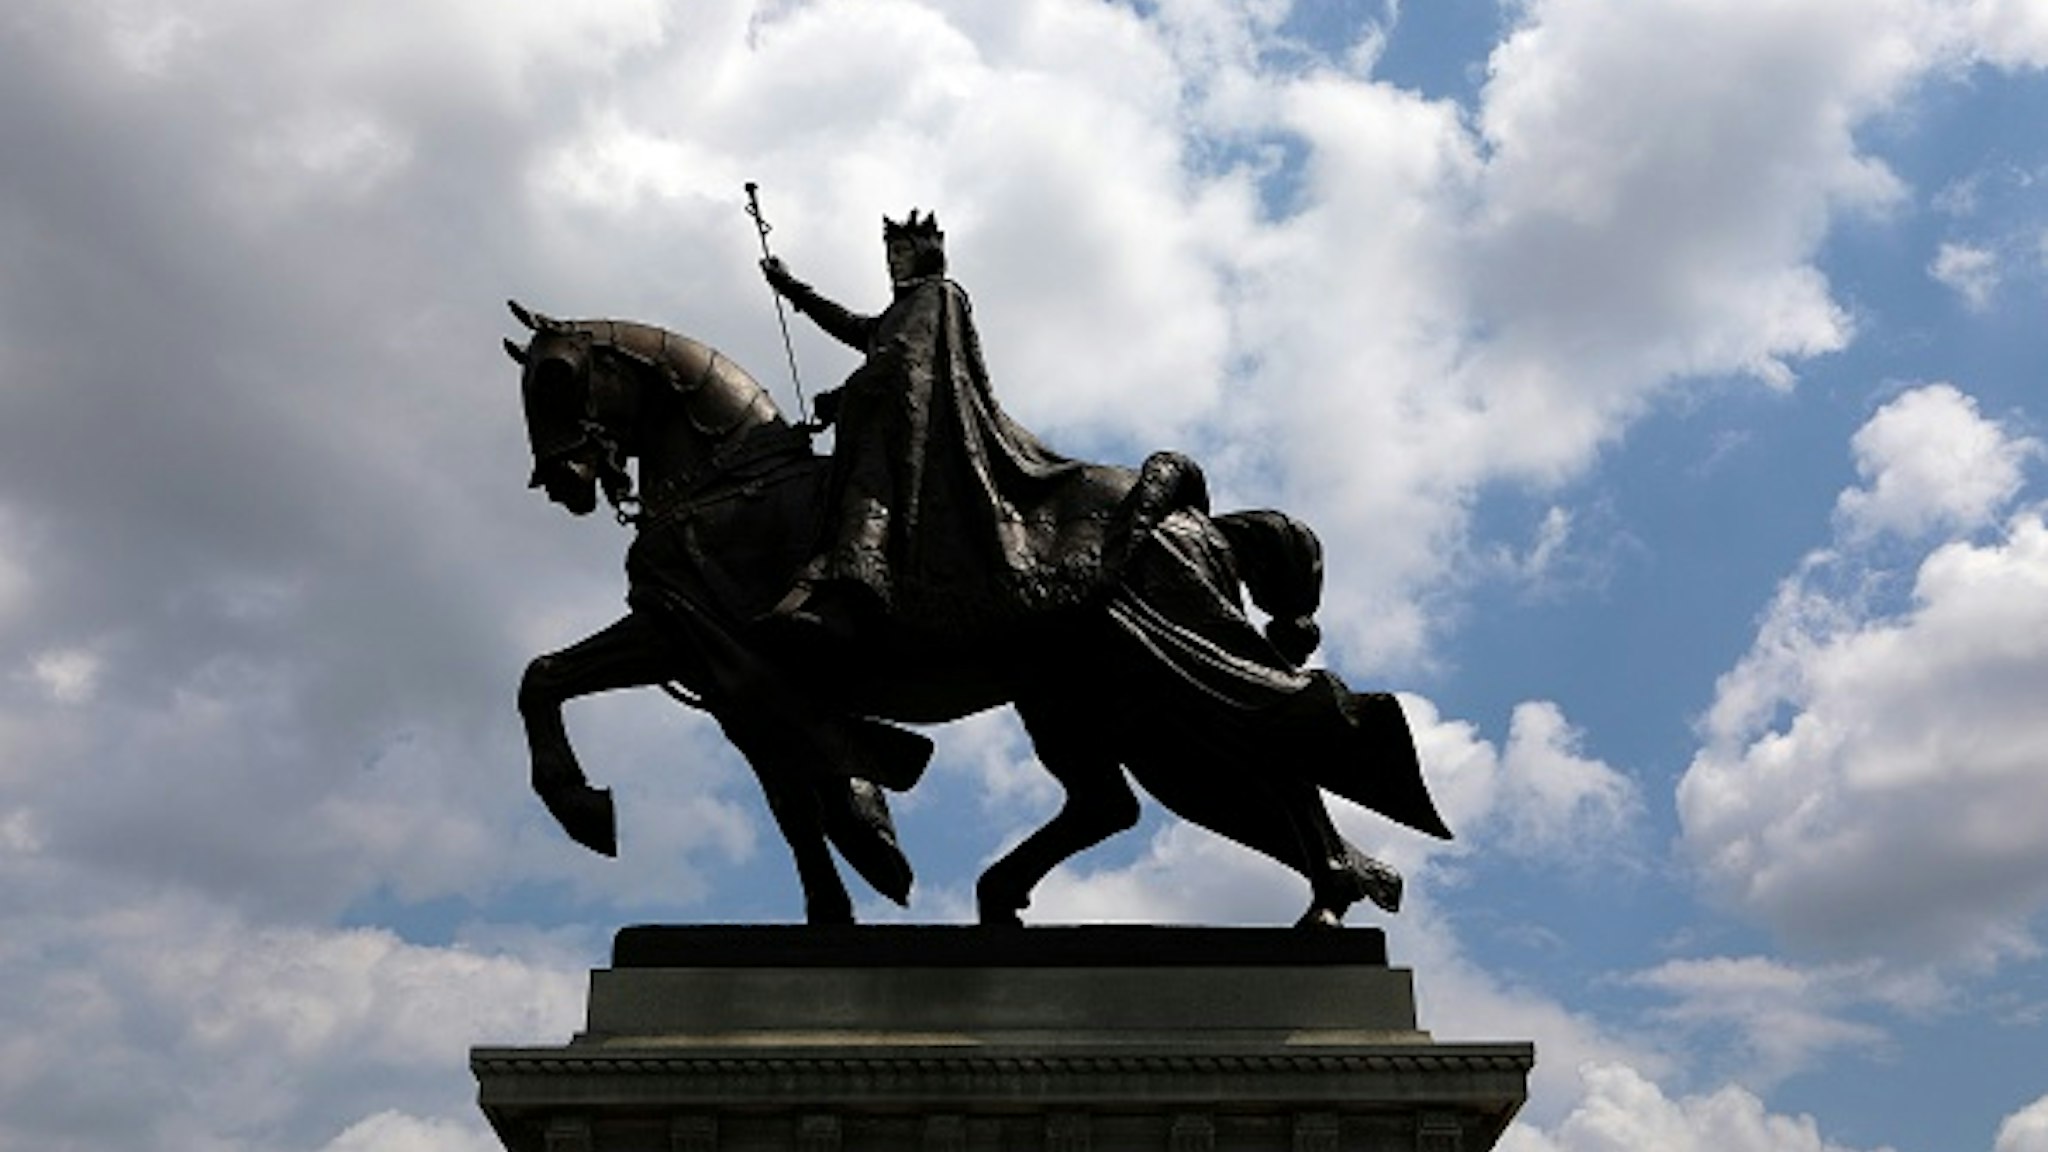 ST. LOUIS - AUGUST 10: 'Apotheosis of St. Louis', a statue of King Louis IX of France, the namesake of St. Louis, Missouri stands outside the St. Louis Art Museum in St. Louis, Missouri on August 10, 2017.